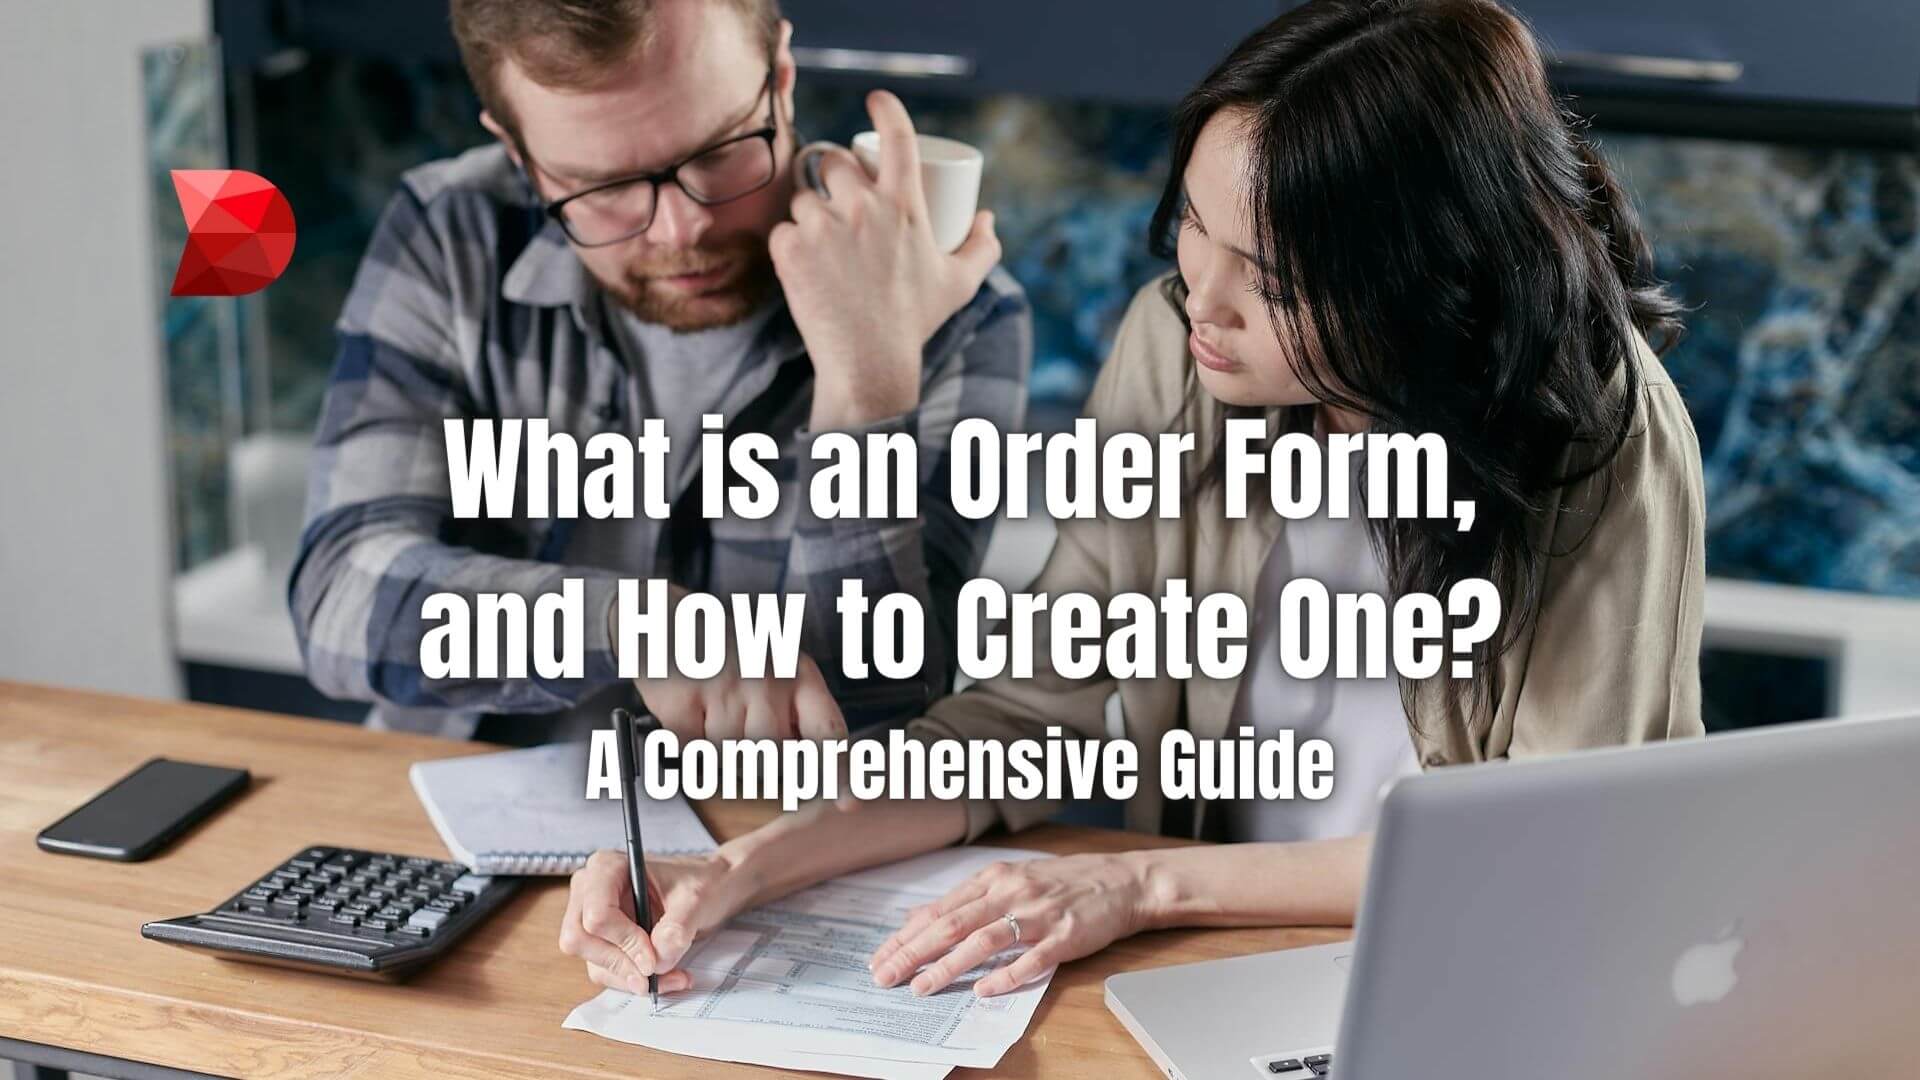 Master the art of order form creation with our full guide. Discover essential tips and tricks to optimize your forms for maximum efficiency.